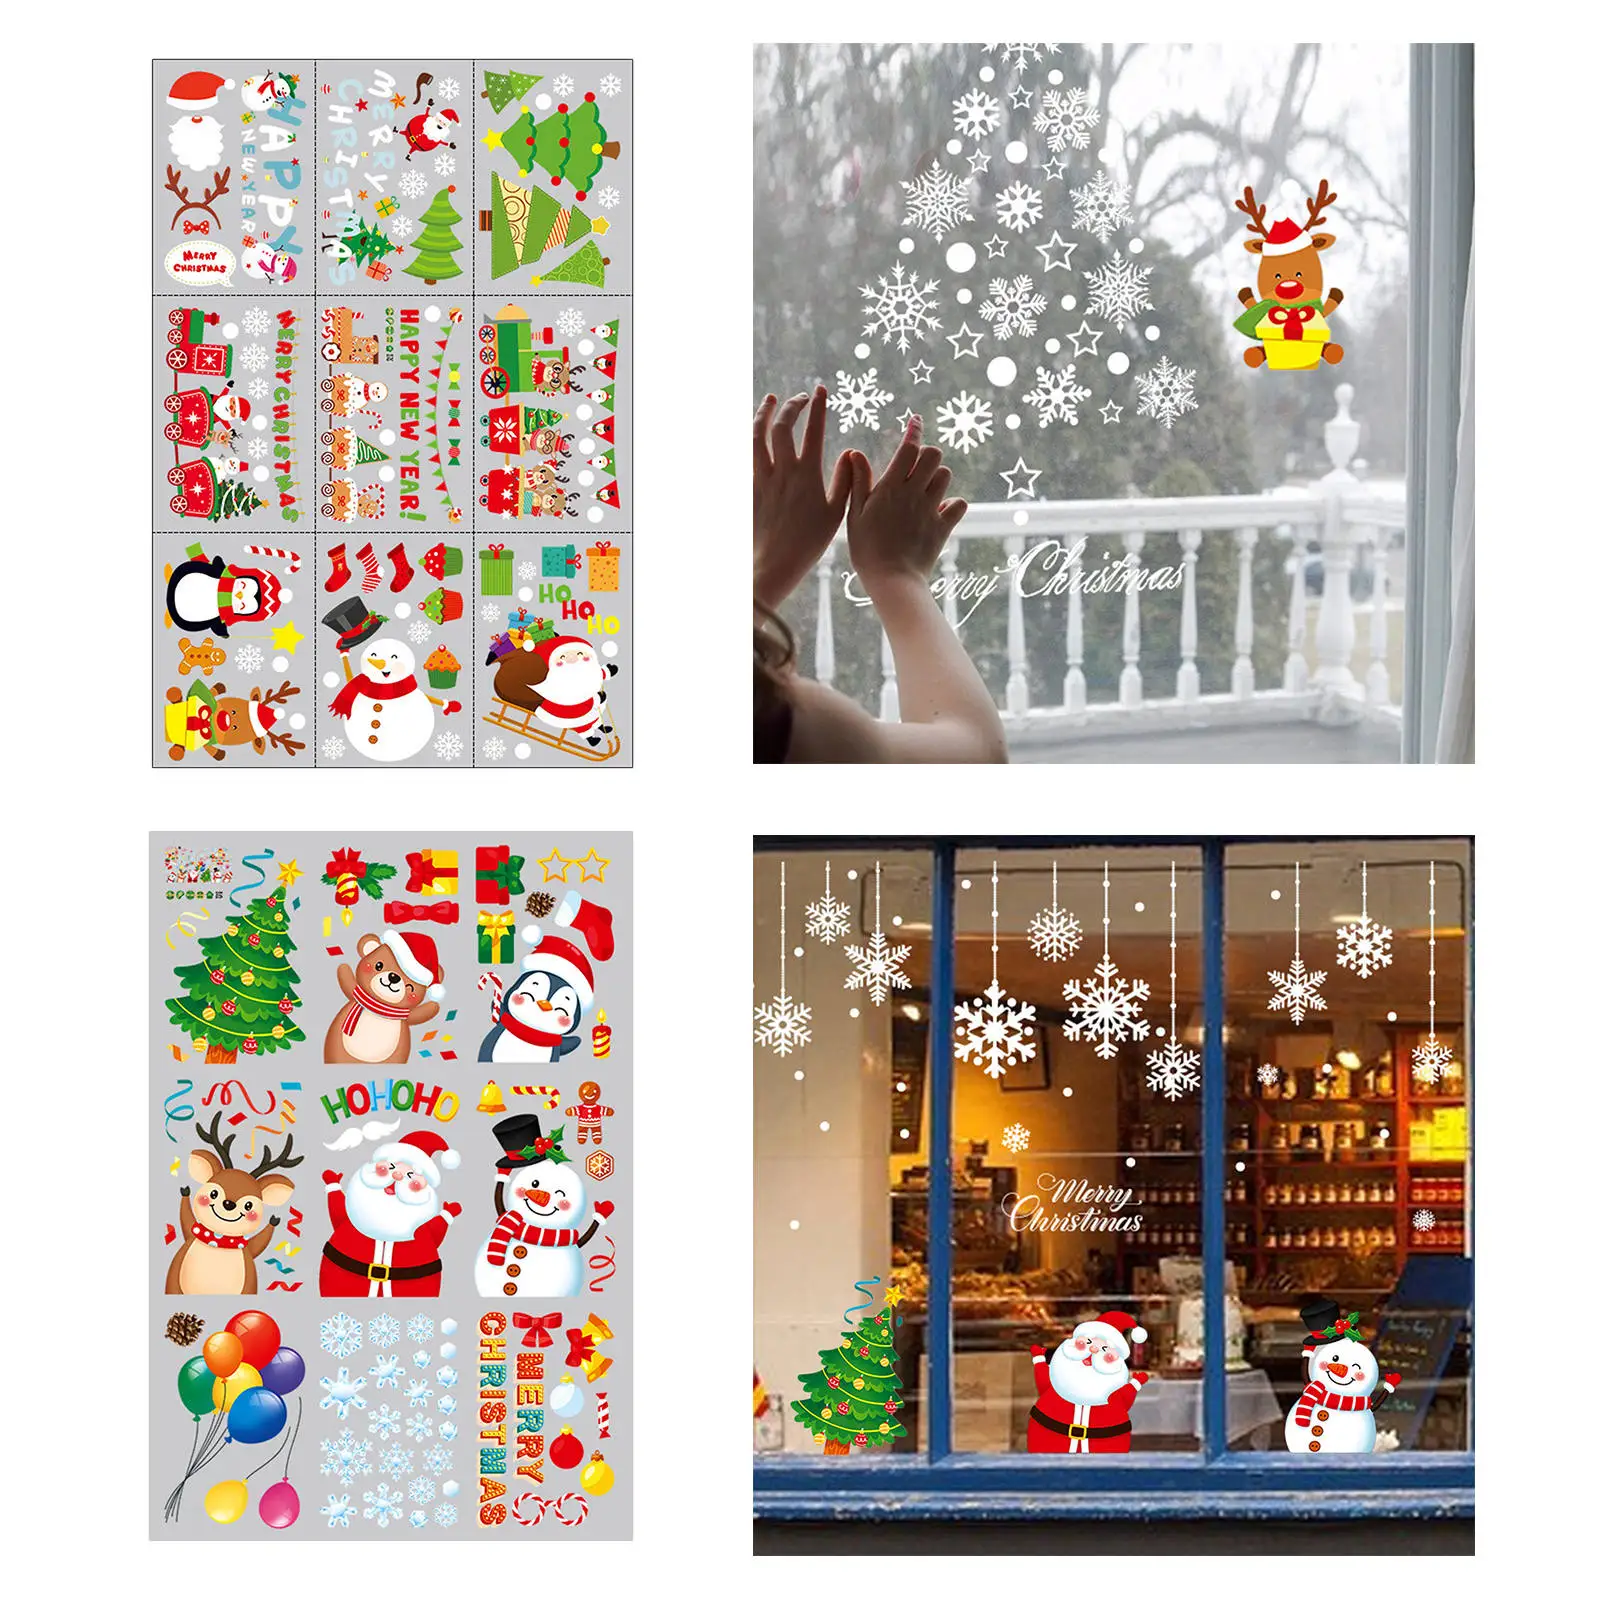 Christmas Window Stickers Showcase Window Glass Festival Clings Santa Murals New Year Christmas Decorations for Home